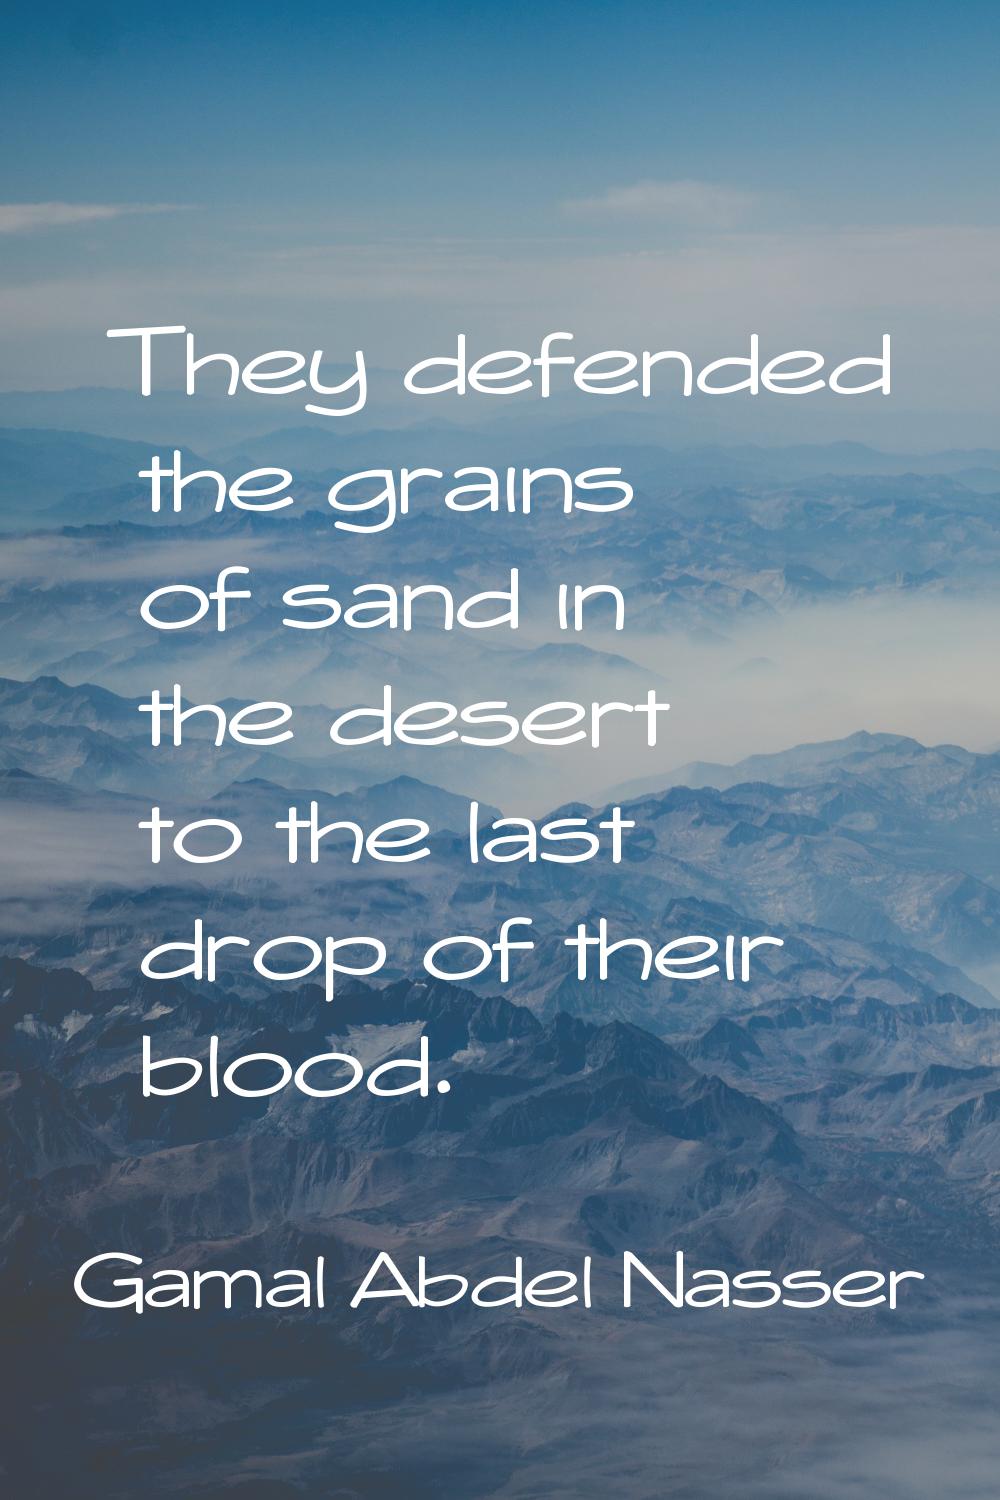 They defended the grains of sand in the desert to the last drop of their blood.